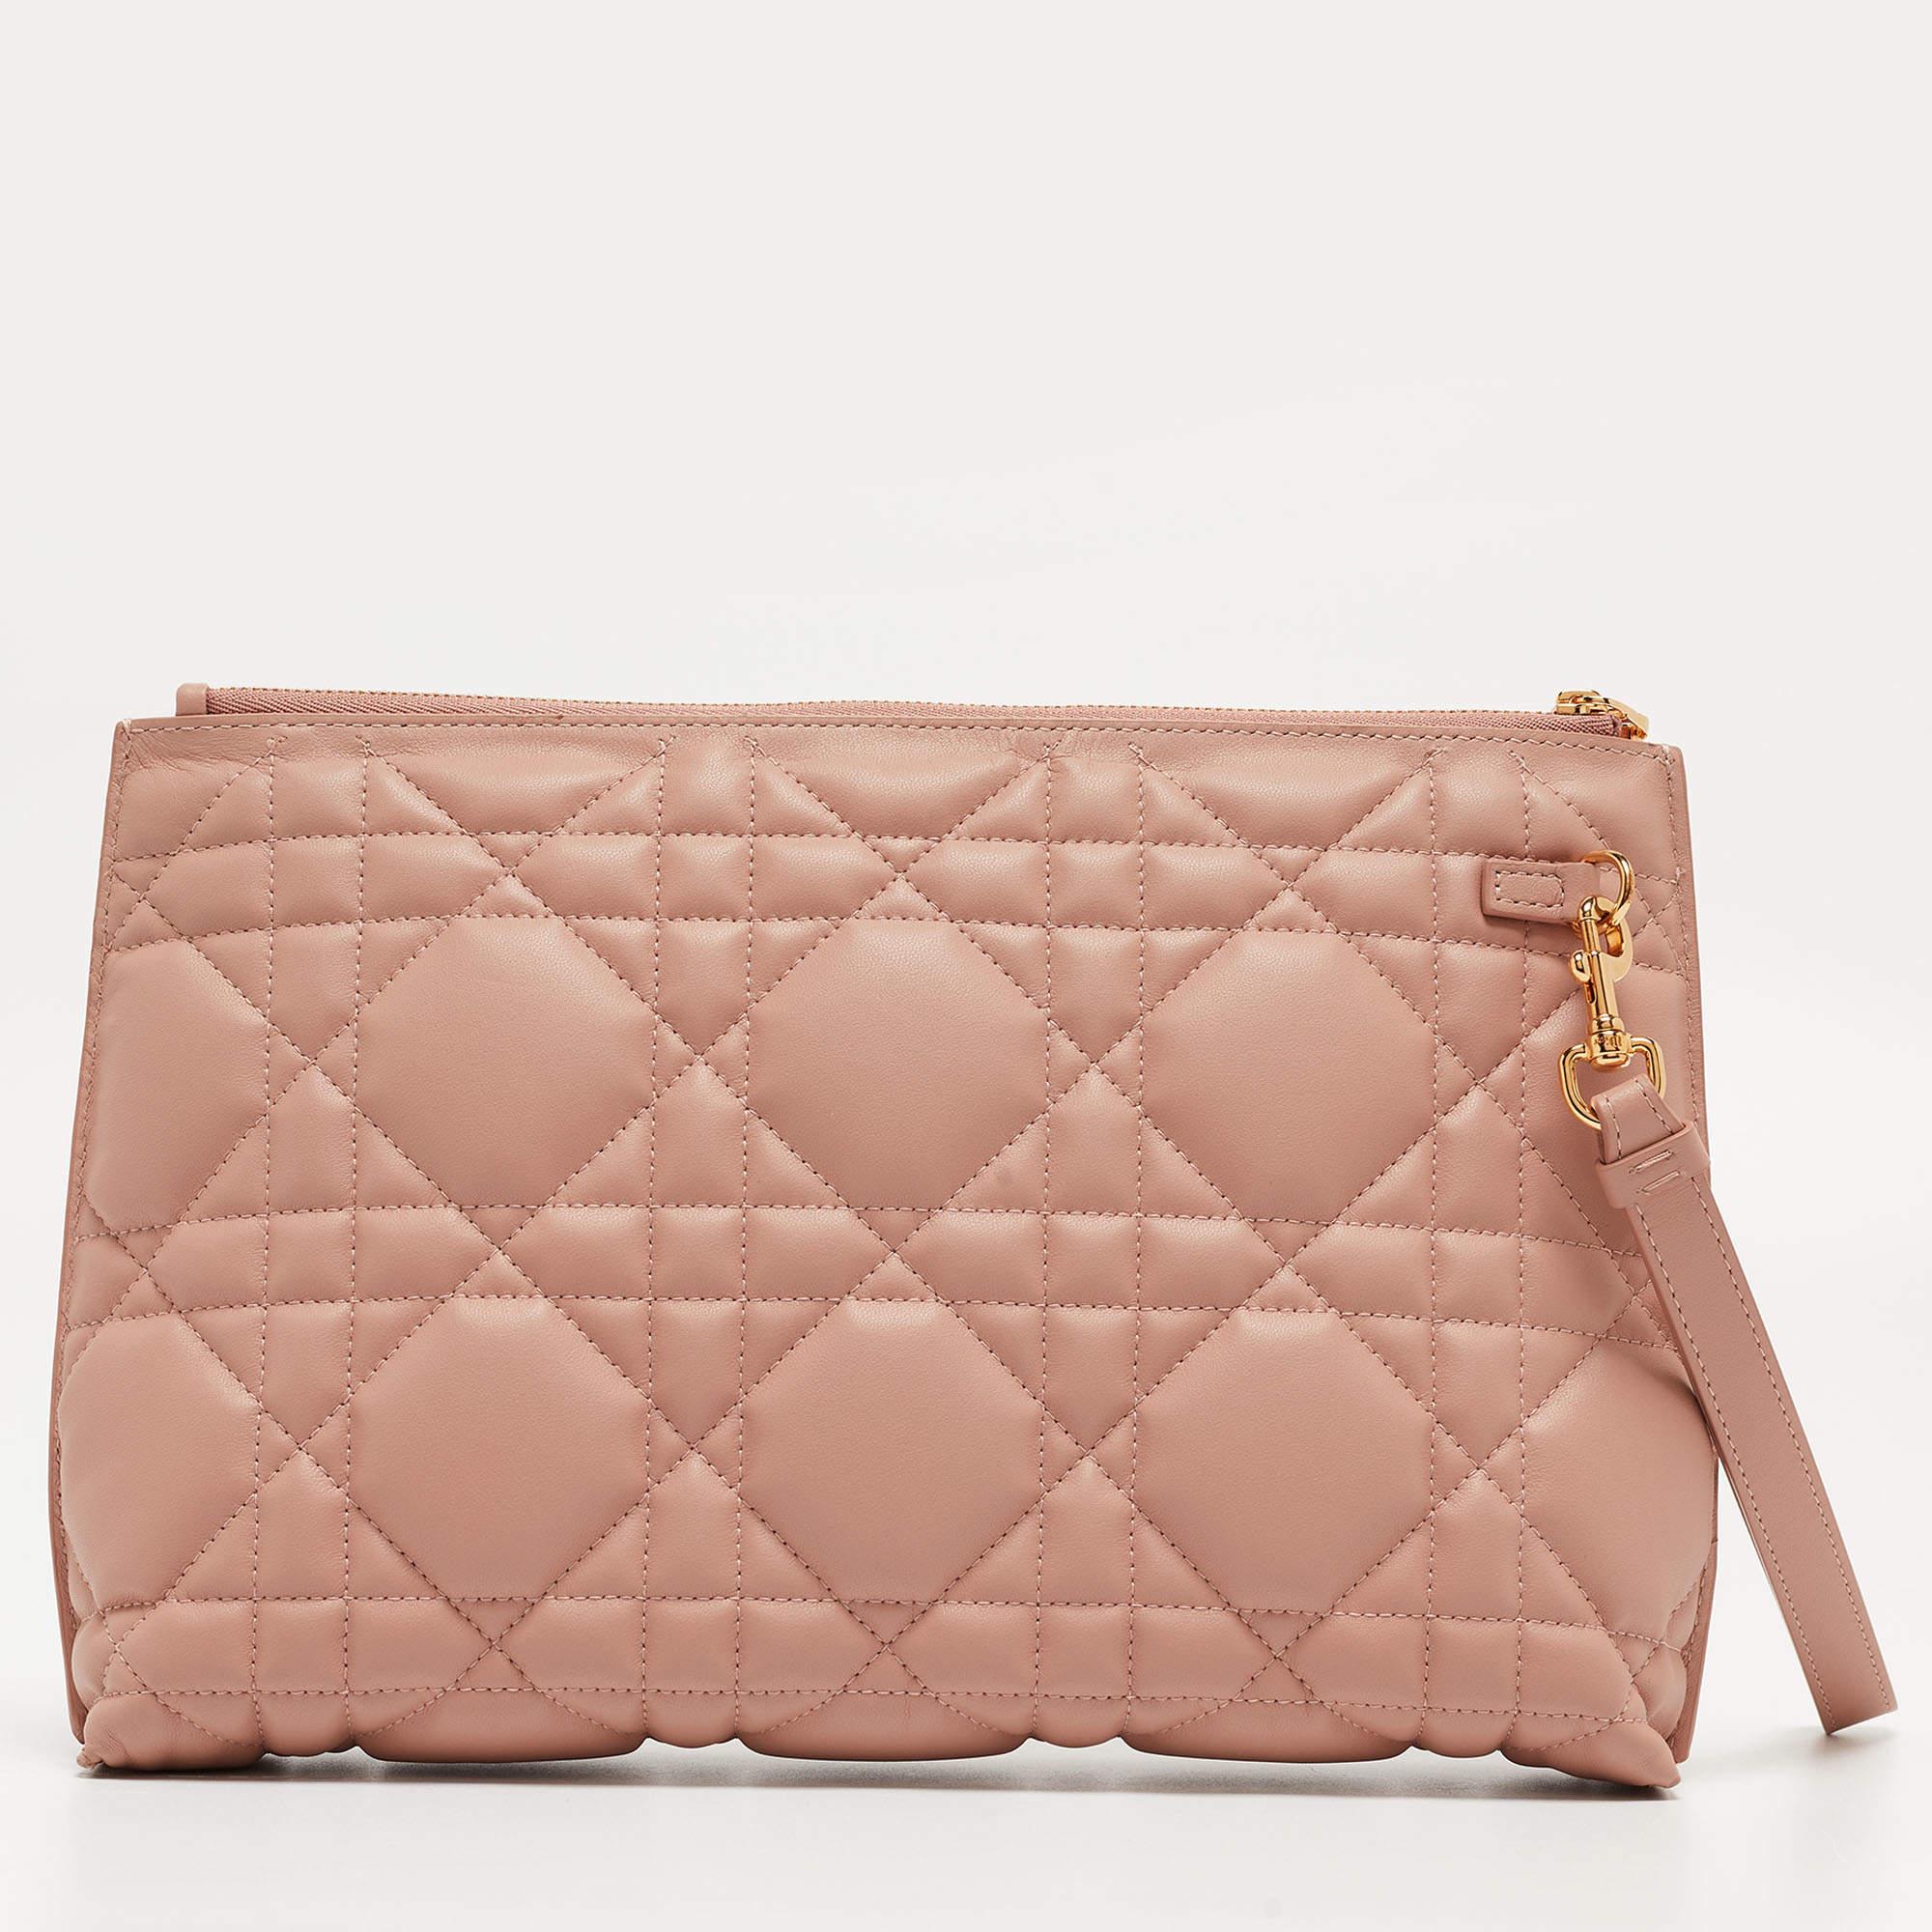 Introducing the Dior Caro D-Every Pouch, a stunning accessory that seamlessly combines style and functionality. Crafted with exquisite pink Cannage leather, this spacious pouch boasts a timeless design, perfect for adding a touch of luxury to any